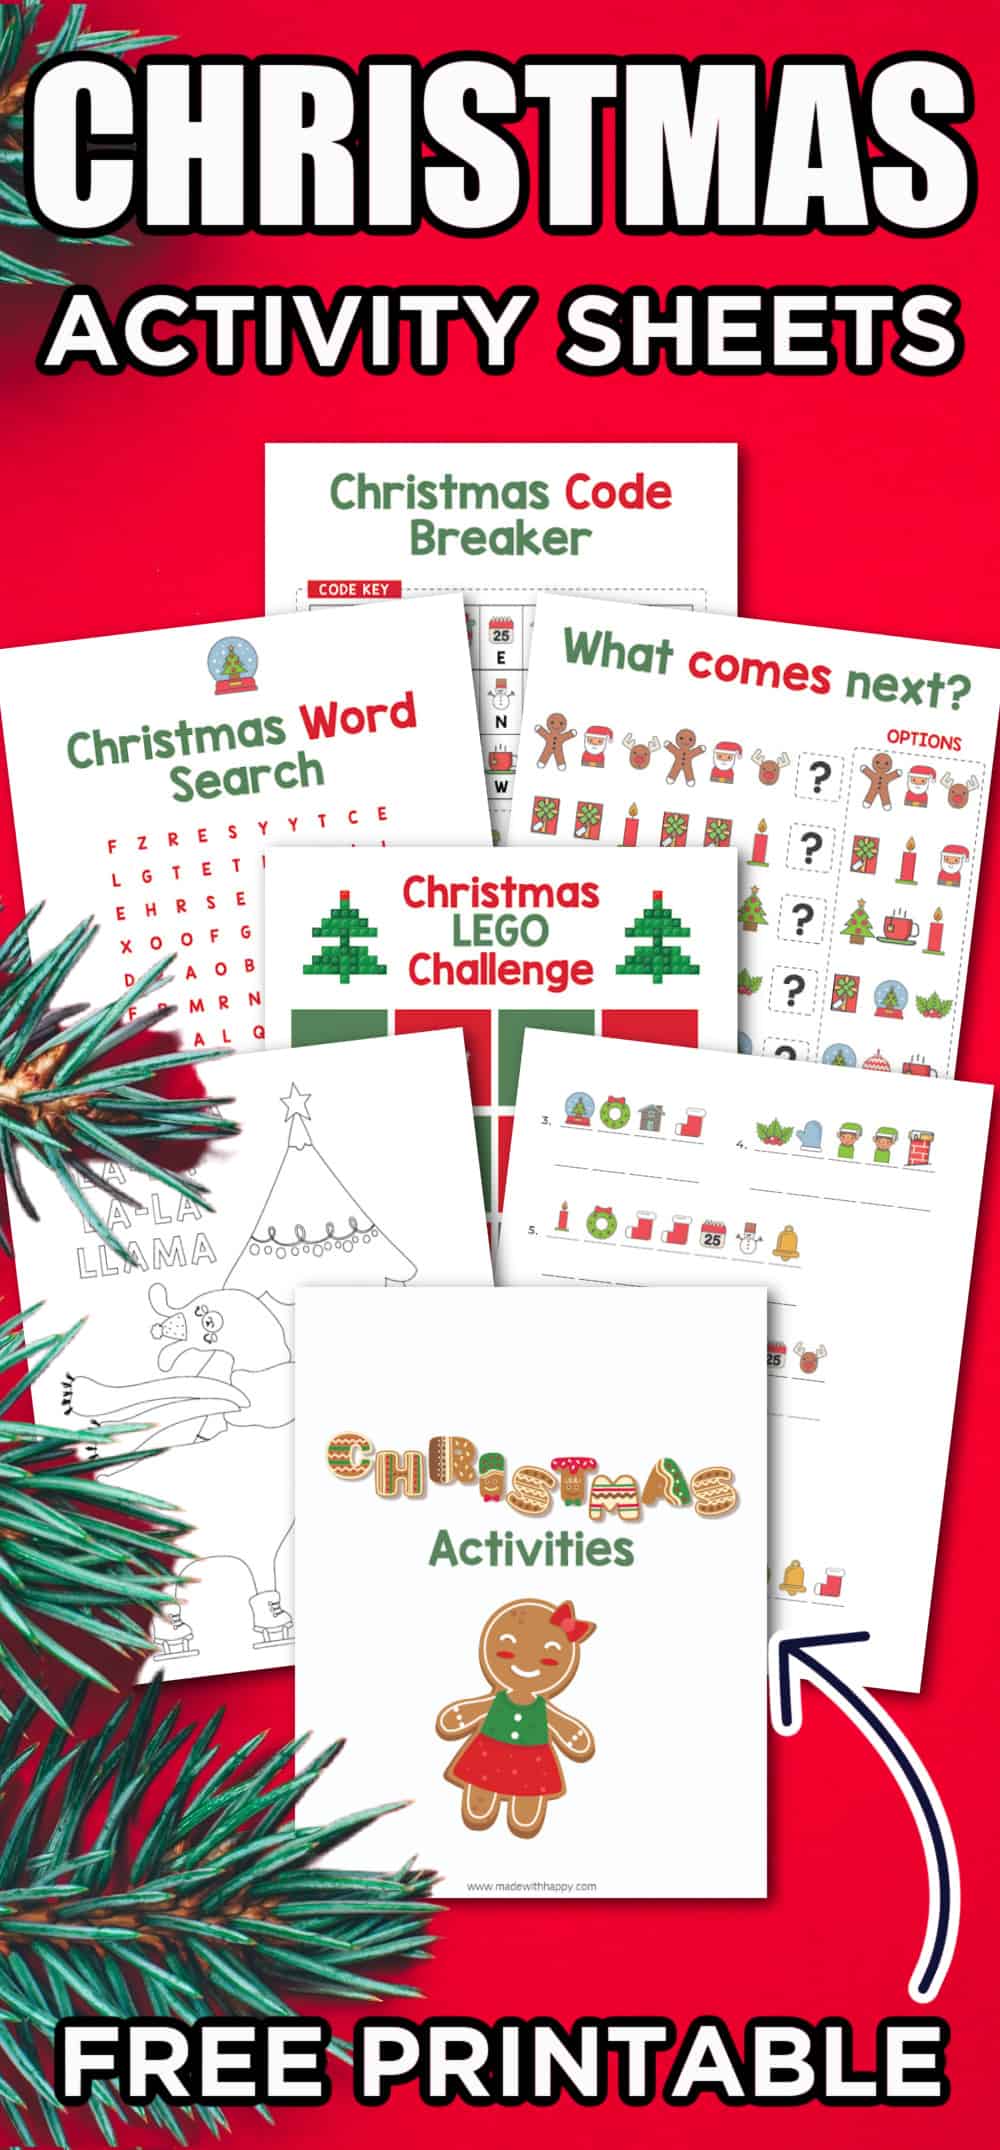 https://www.madewithhappy.com/wp-content/uploads/christmas-activities-printable-1.jpg